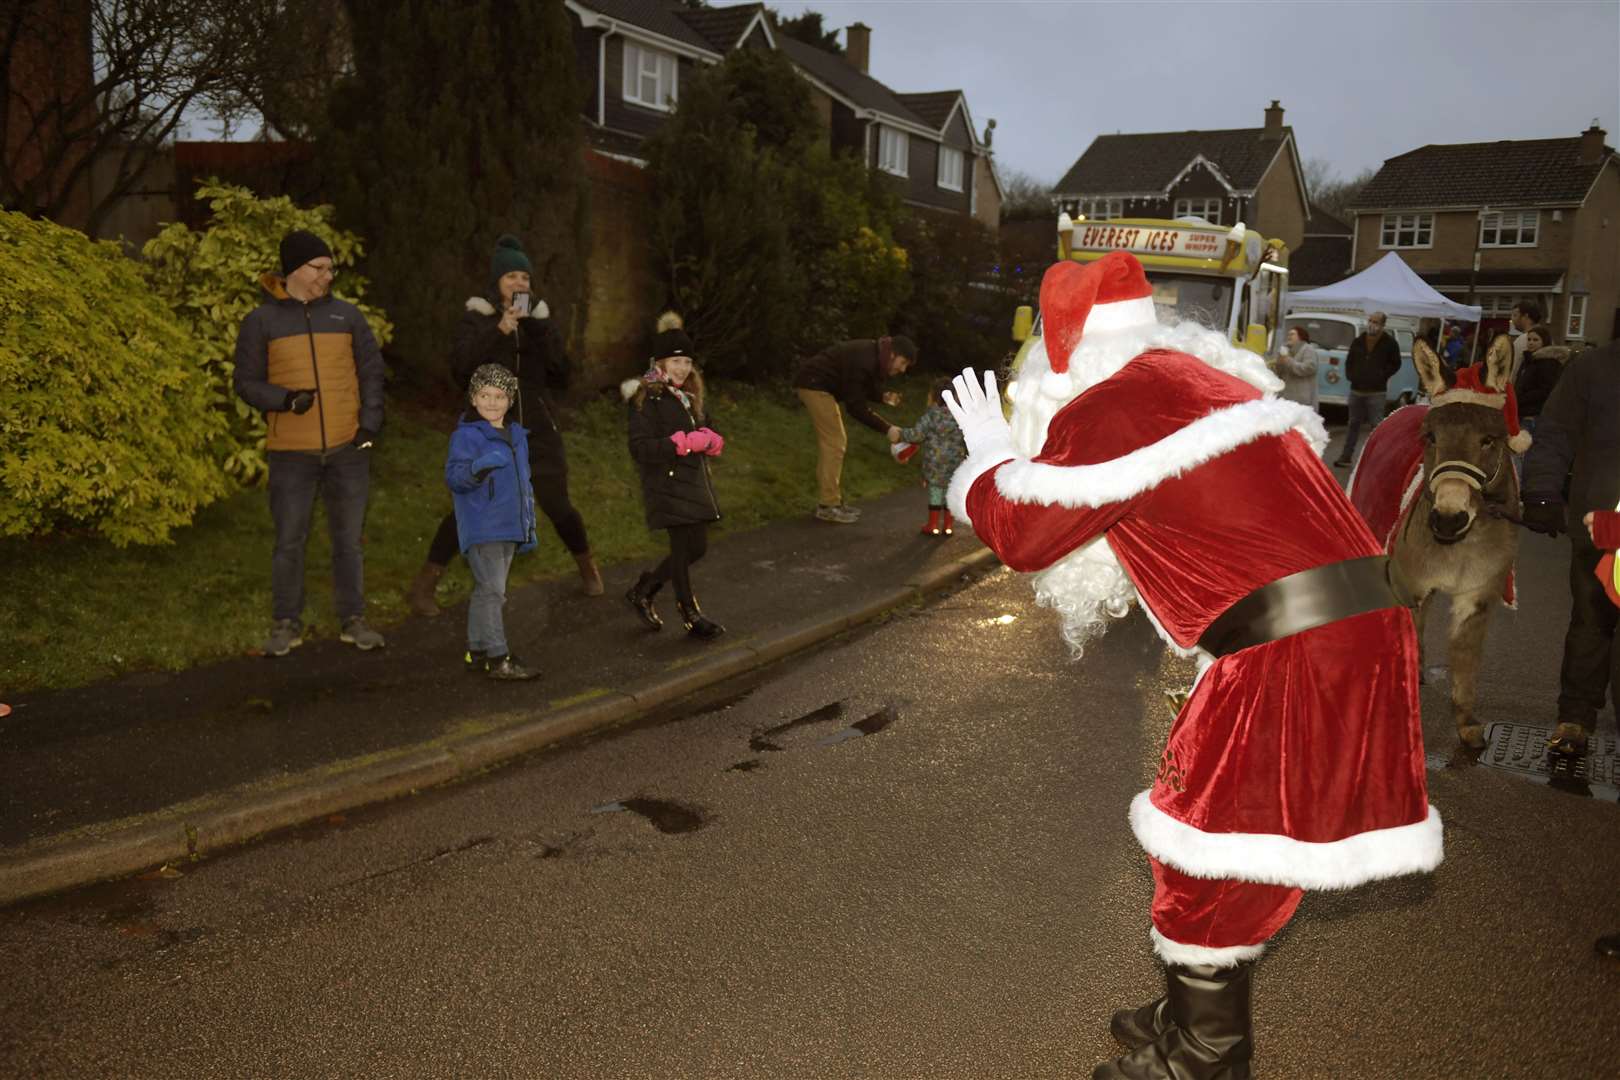 Santa visited the children at the socially distanced event. Picture: Barry Goodwin